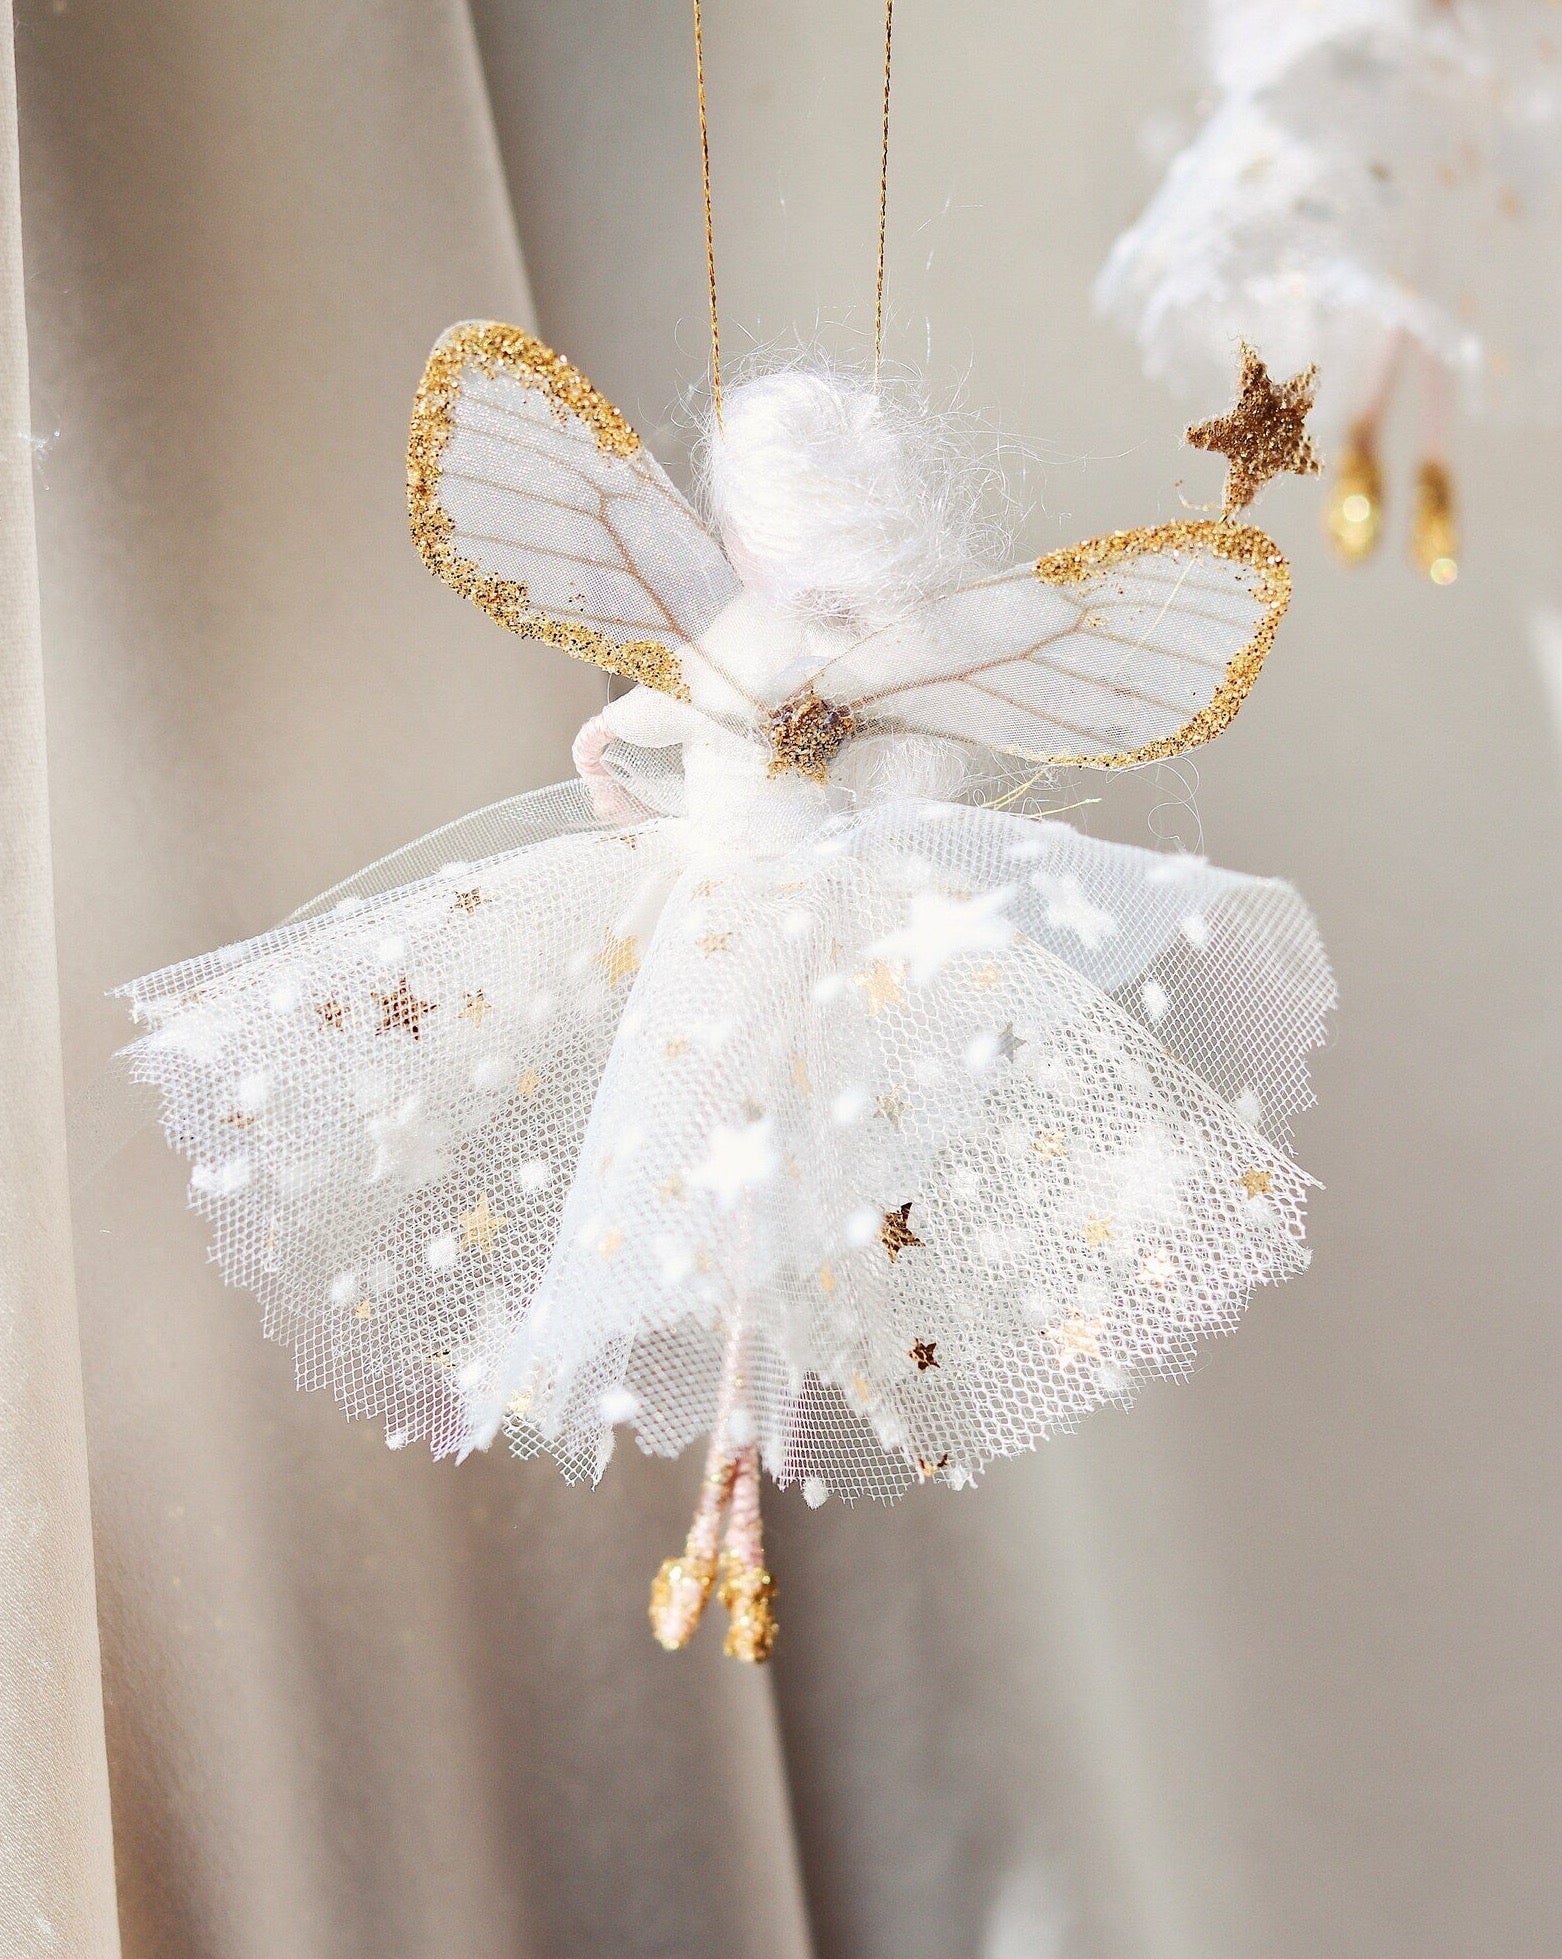 Back of the fairy. Florialice fairy dancing in the light. Christmas gift for girls. Heirloom decoration